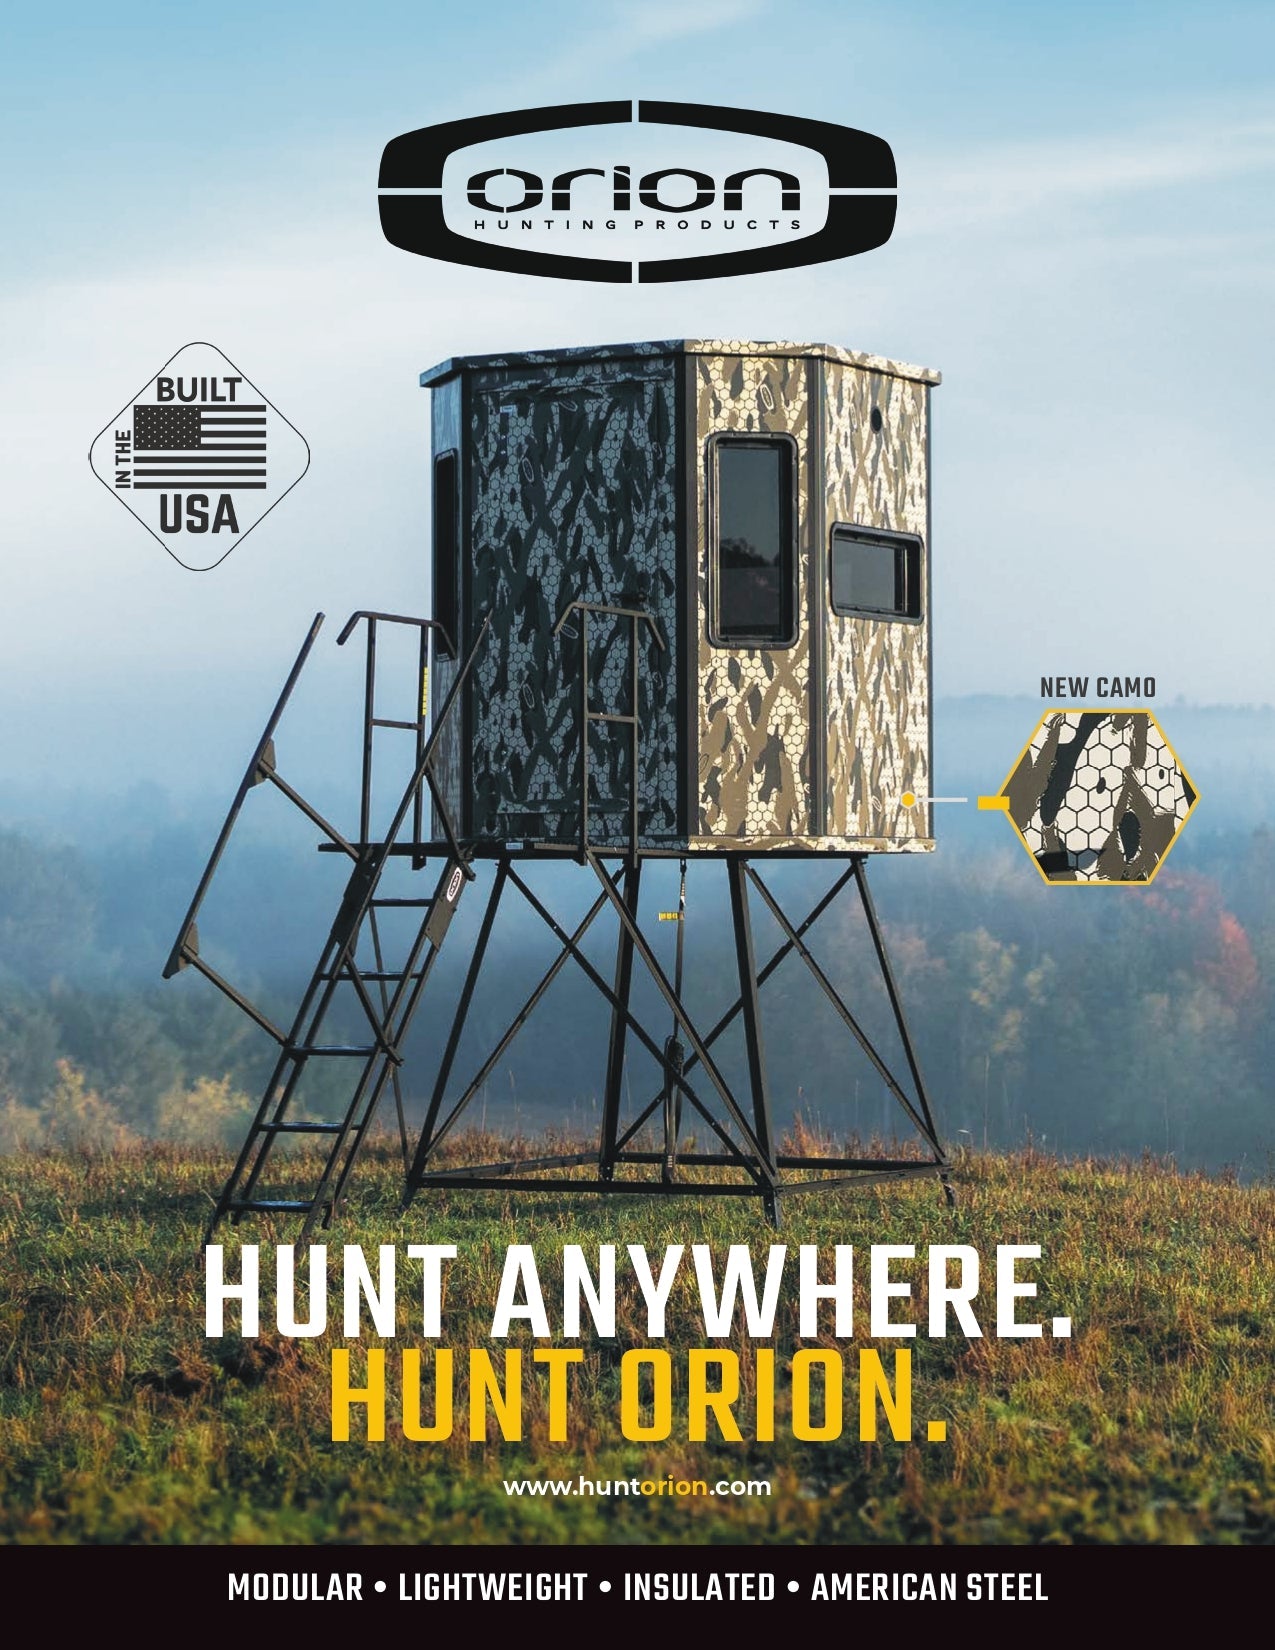 Modular deer hunting insulate box blind Orion Hunting Products